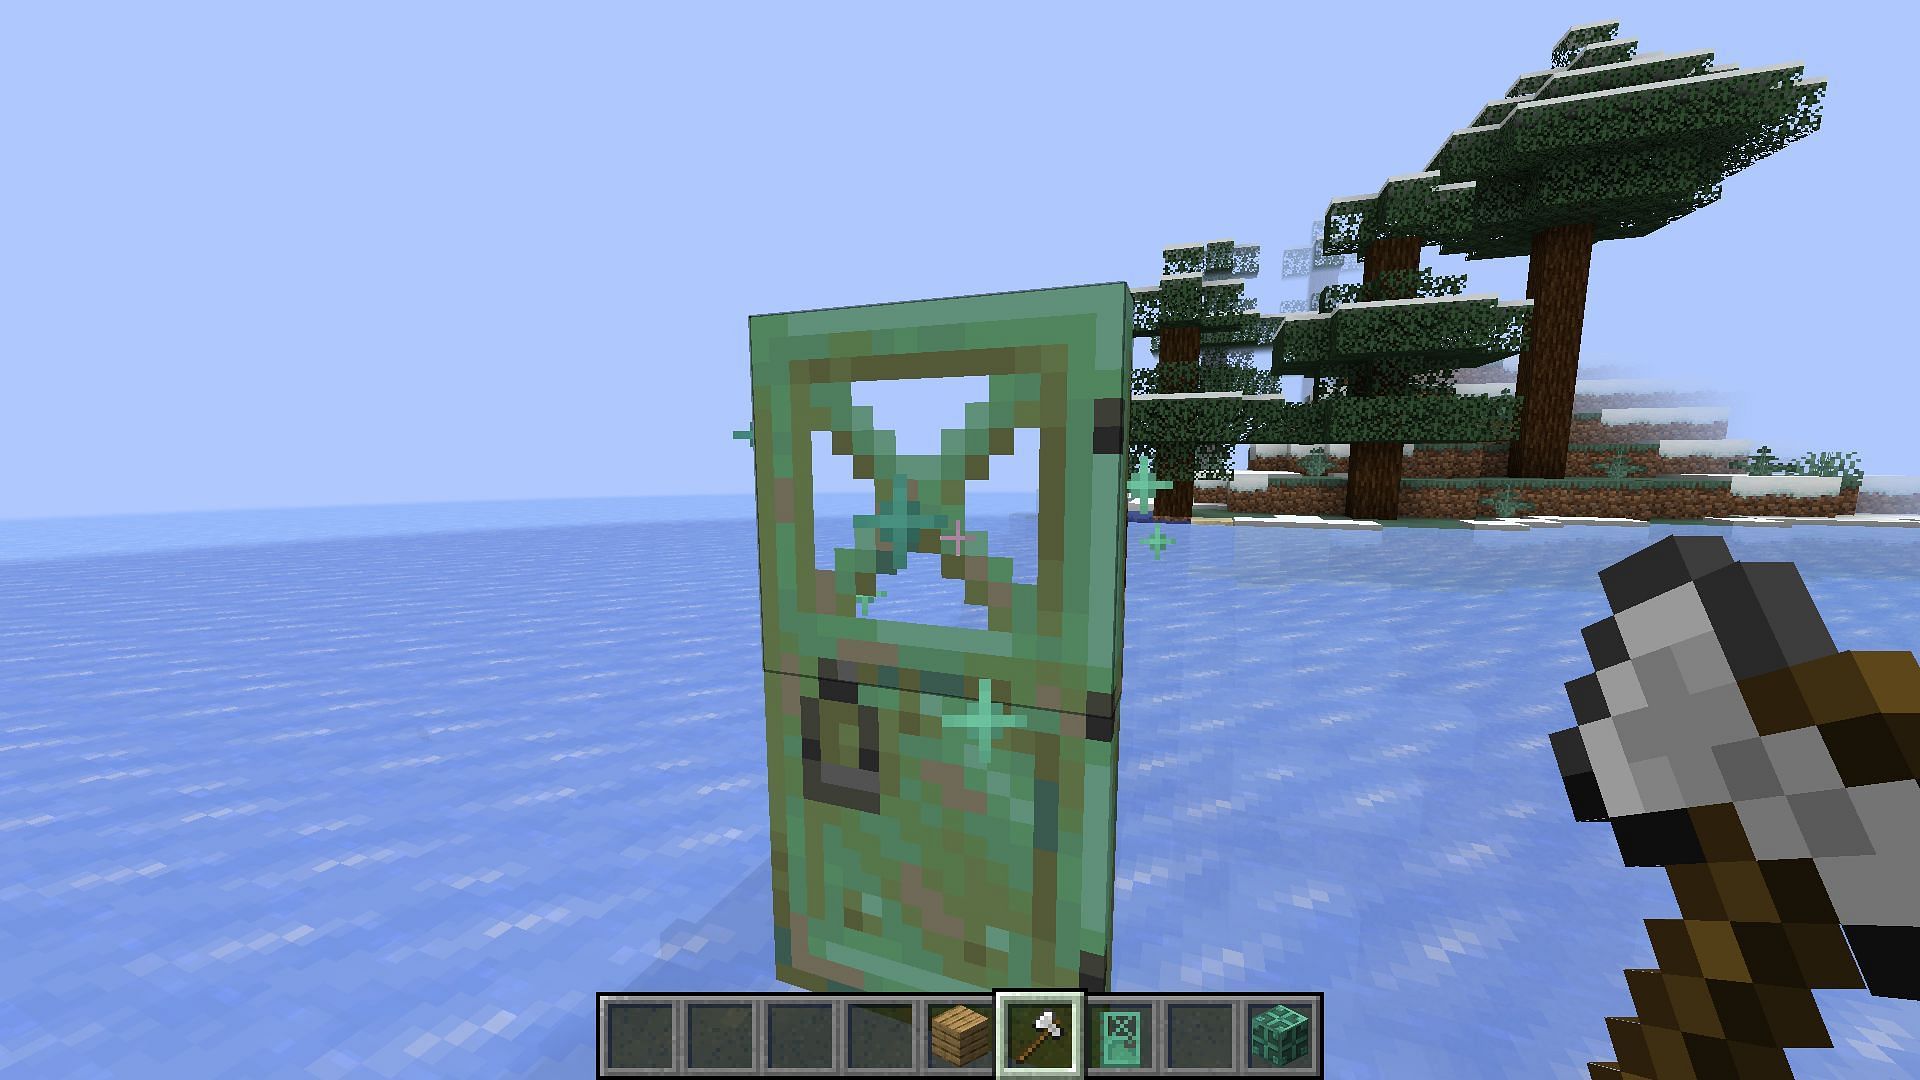 The oxidation can be removed from copper doors by using an axe while crouching down in Minecraft (Image via Mojang)